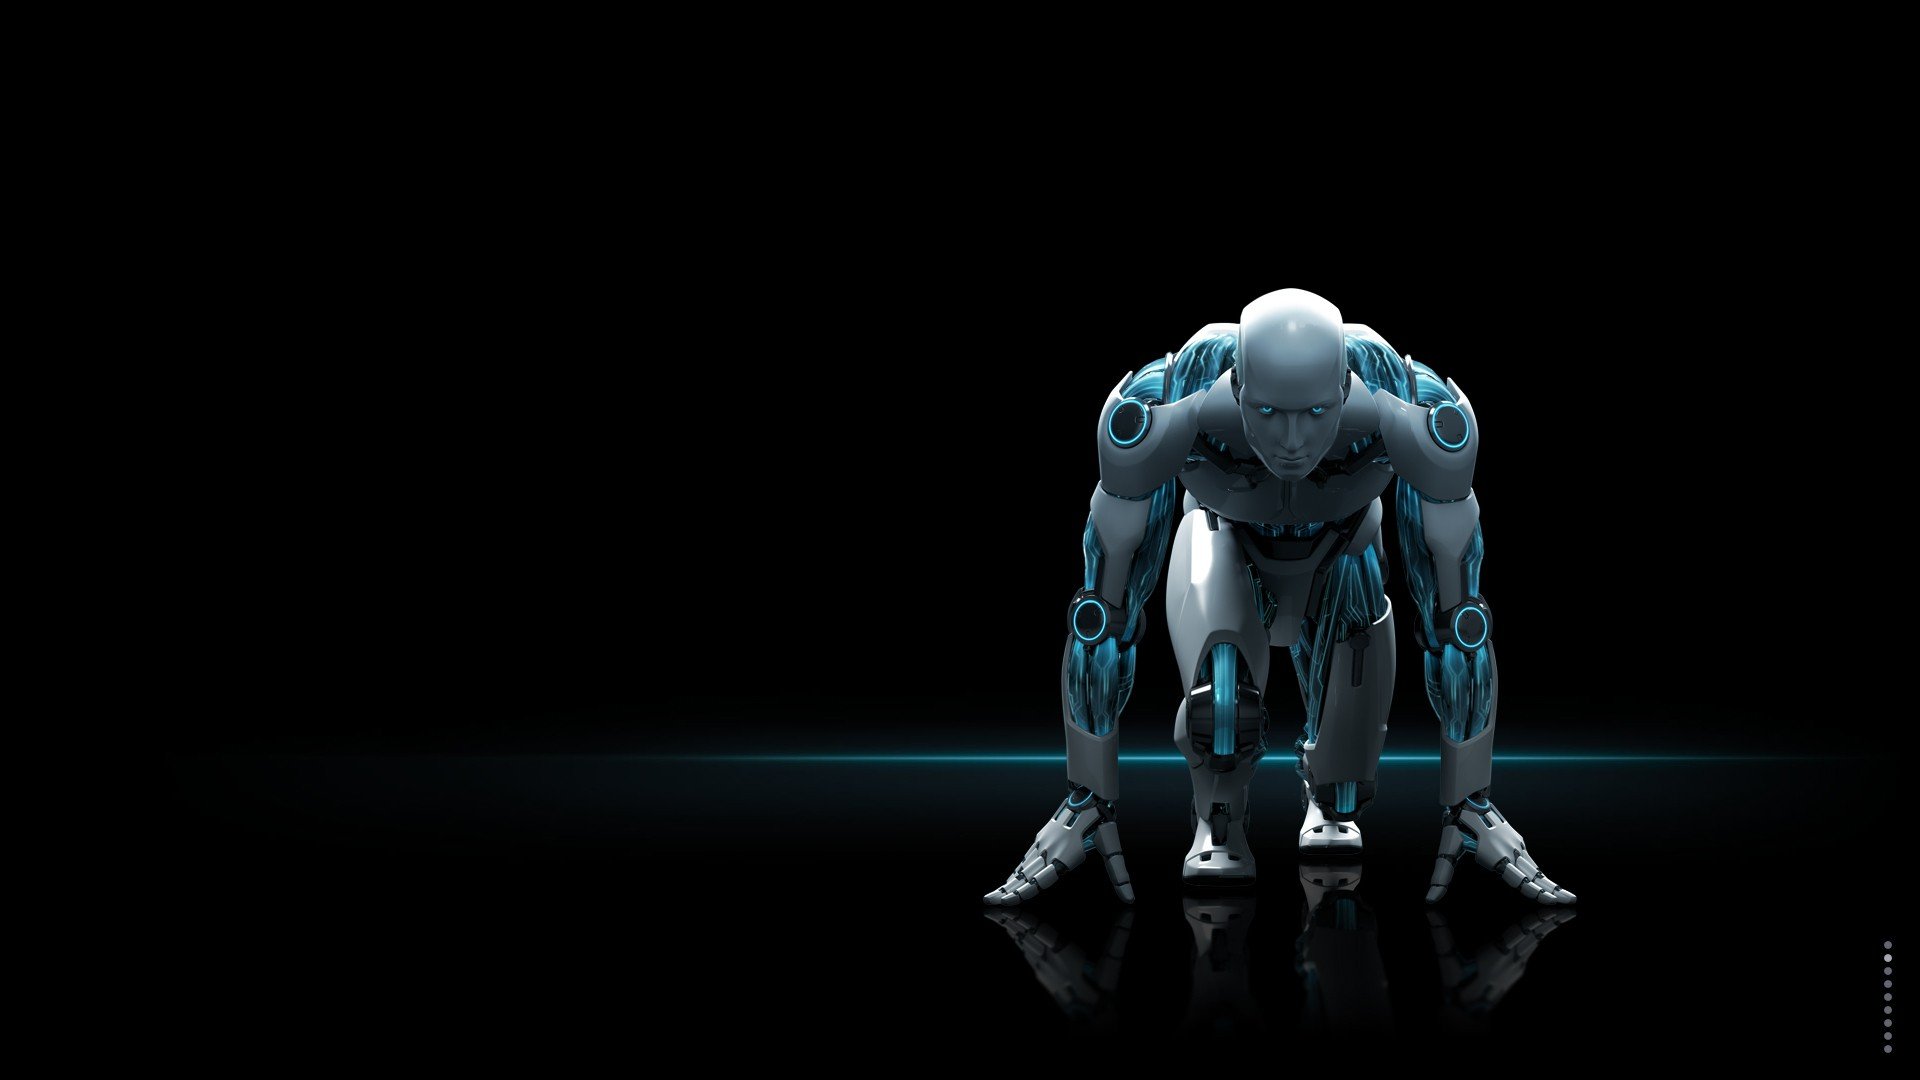 Robot Eset Smart Security Androids Hd Wallpapers Desktop And Mobile